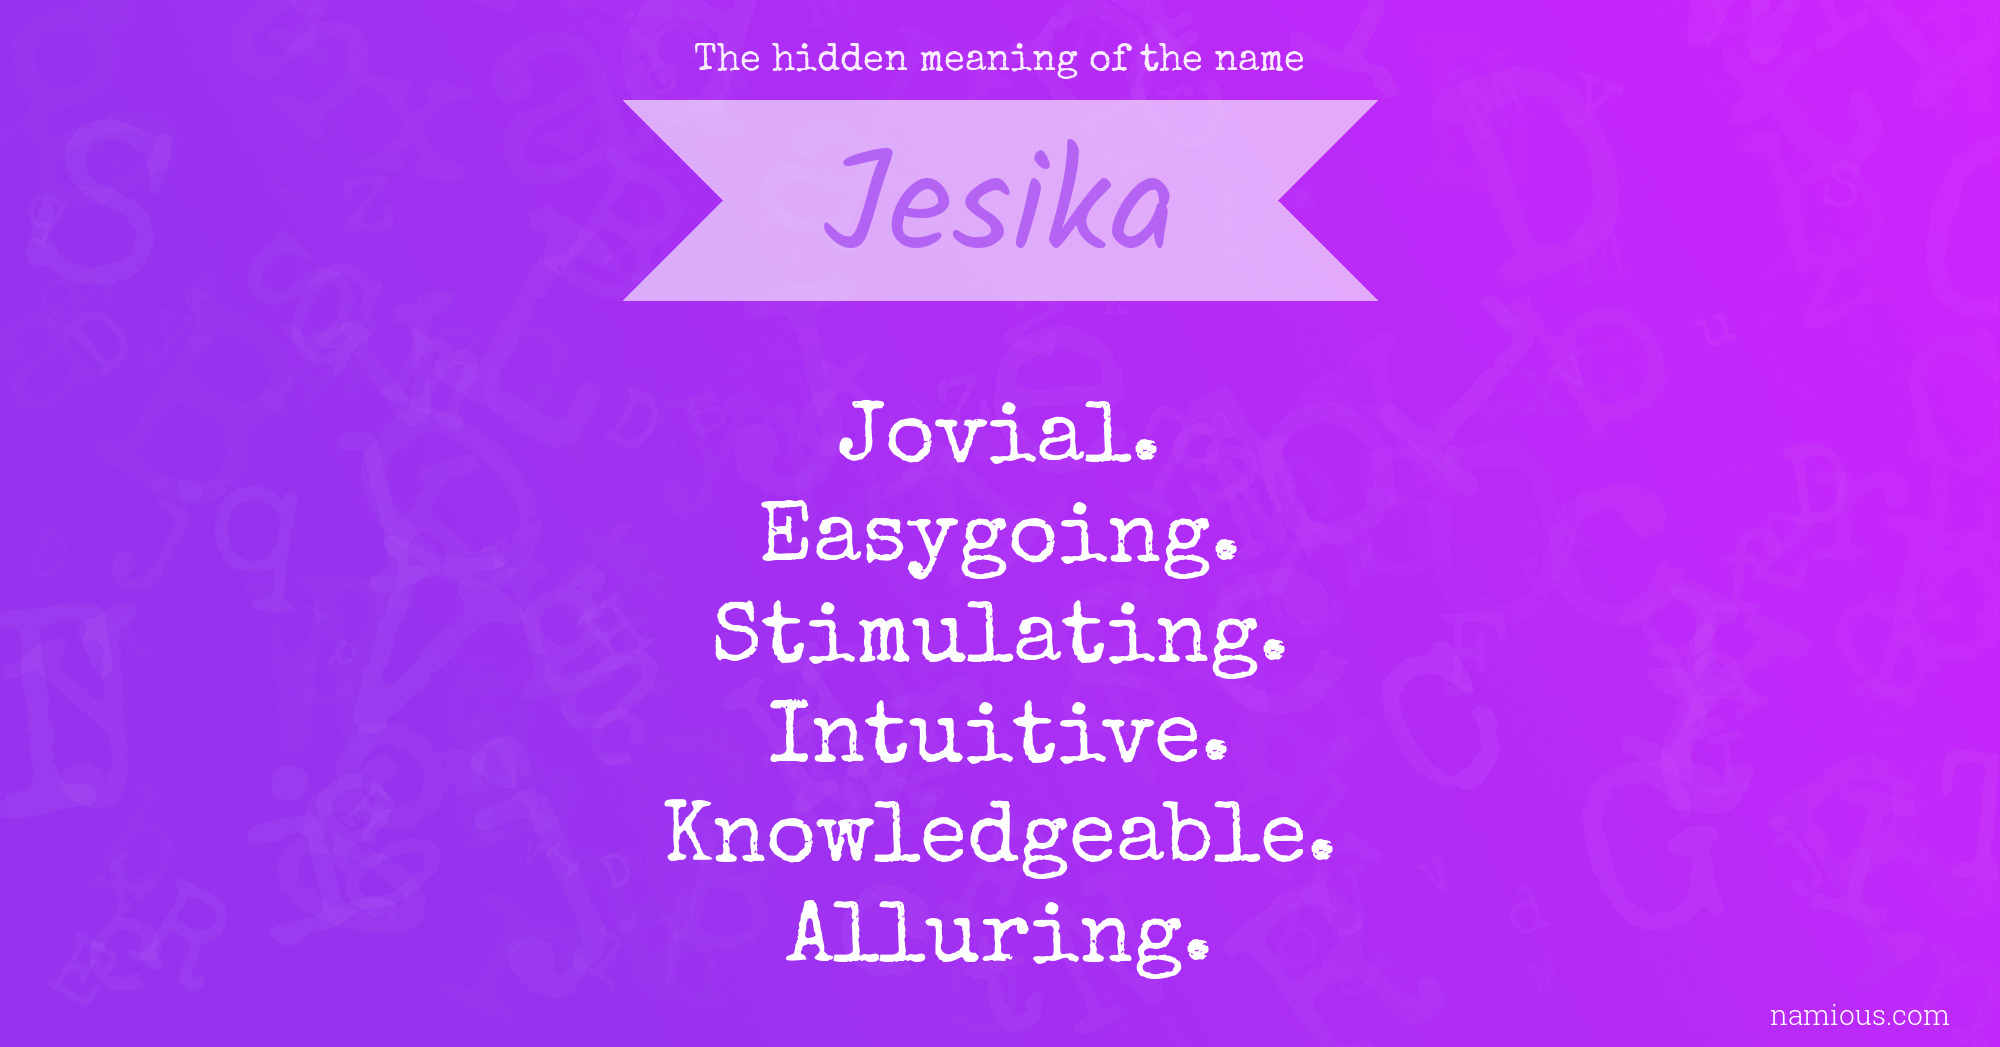 The hidden meaning of the name Jesika